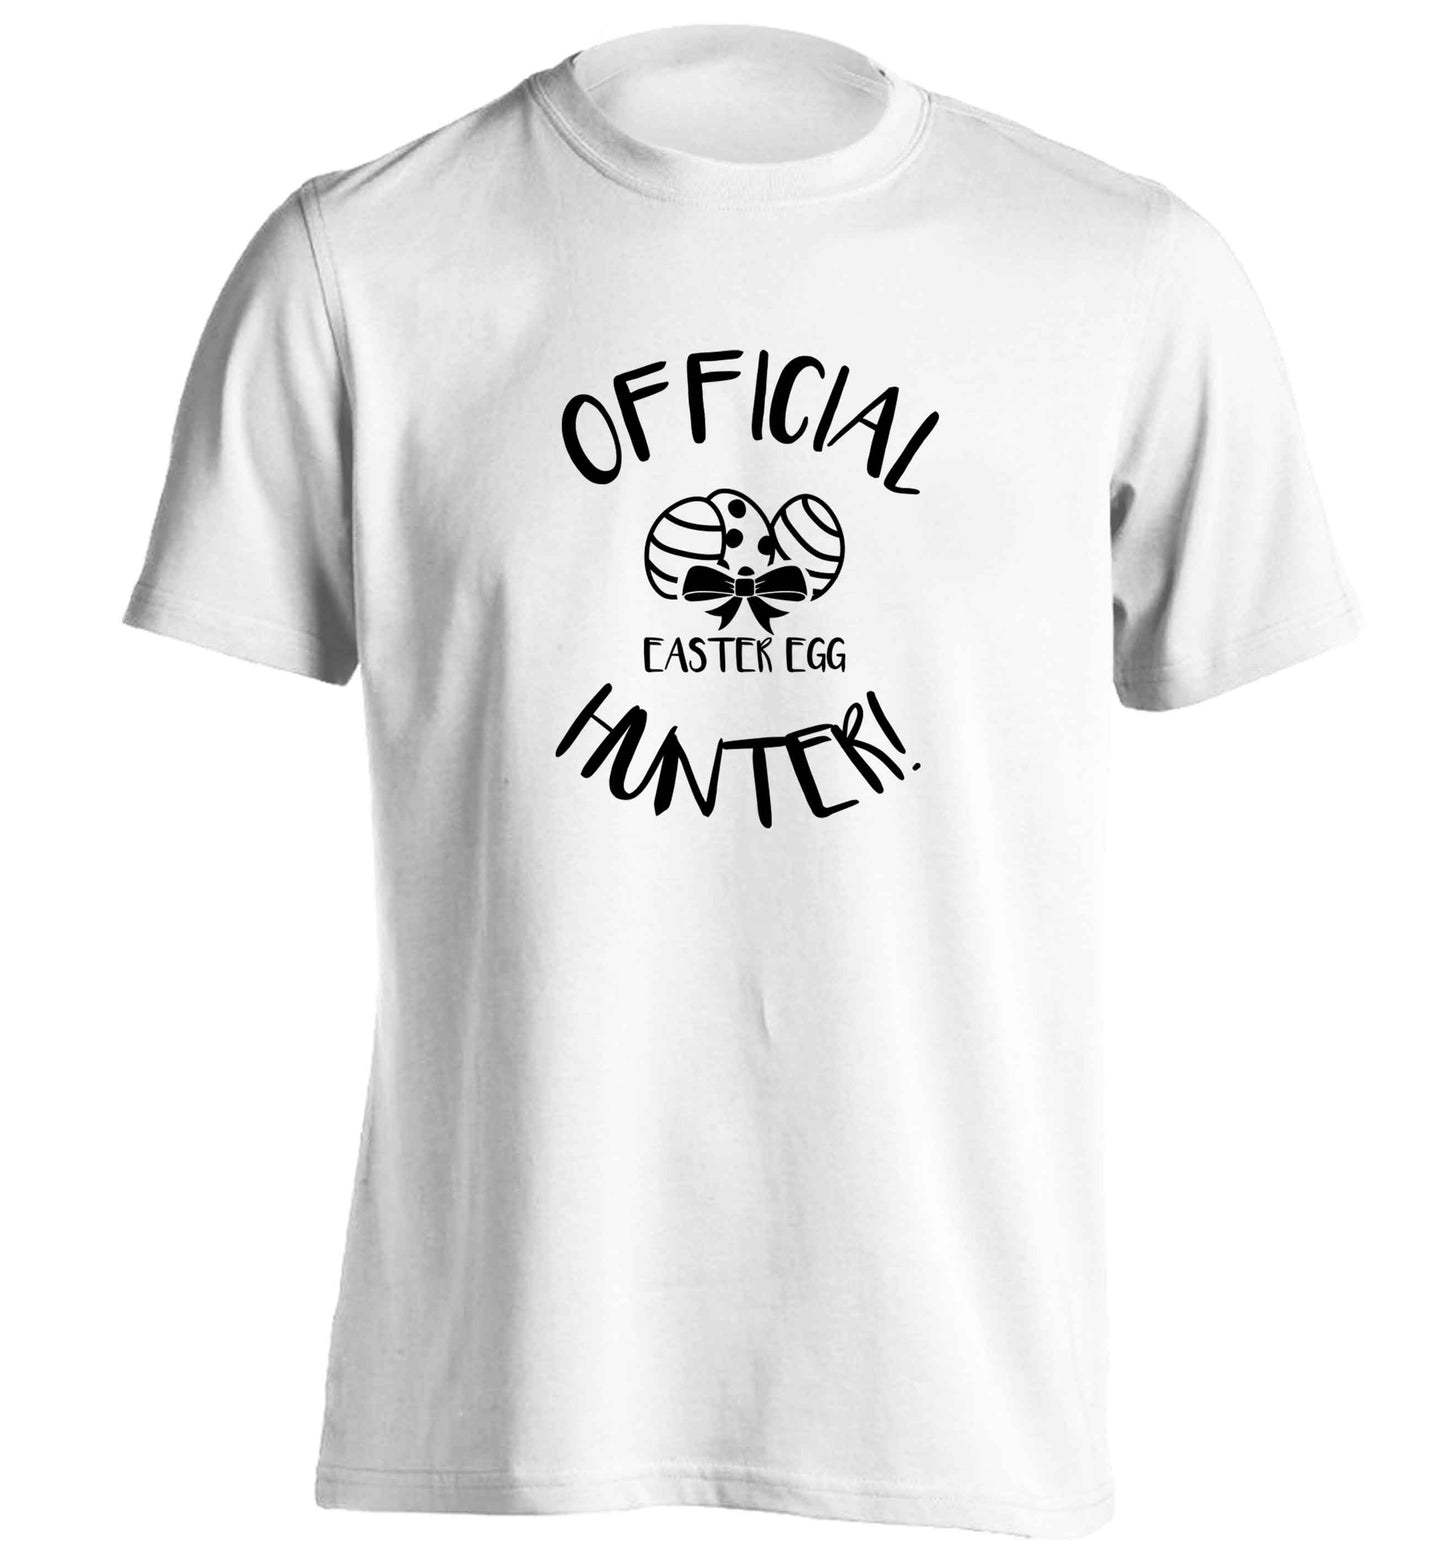 Official Easter egg hunter! adults unisex white Tshirt 2XL